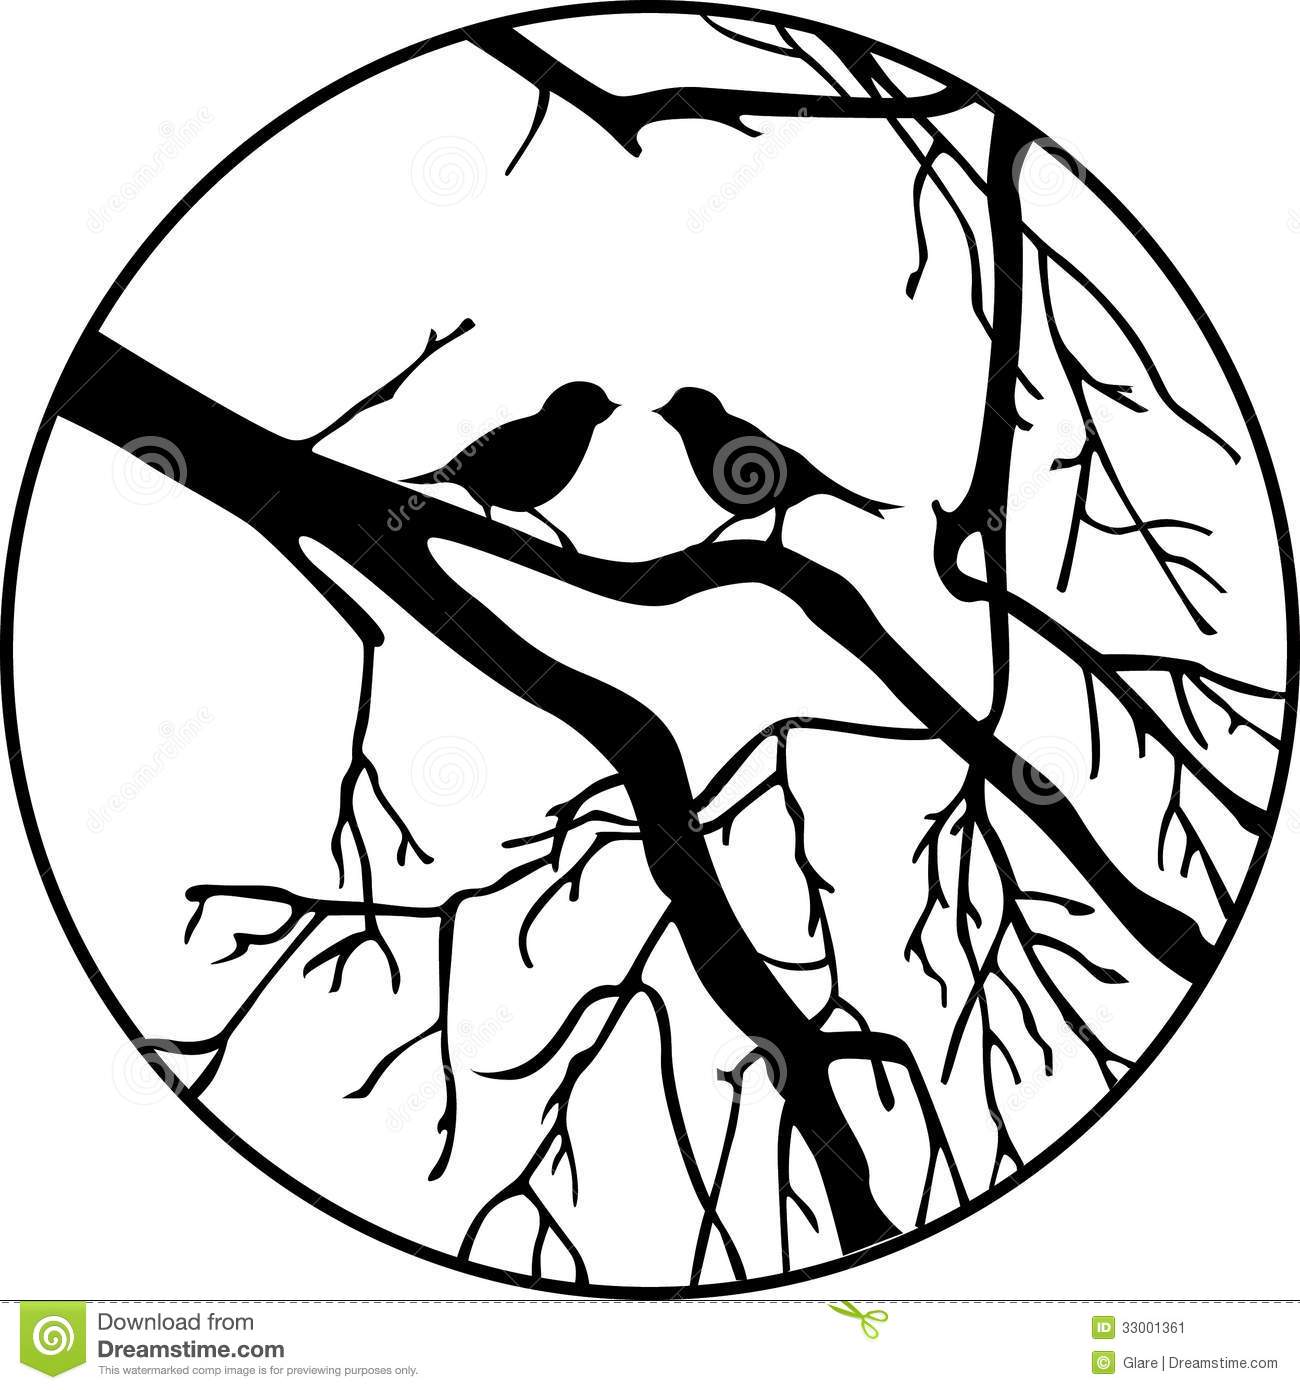 Two Birds Sitting On The Tree Branch Black And White Illustration